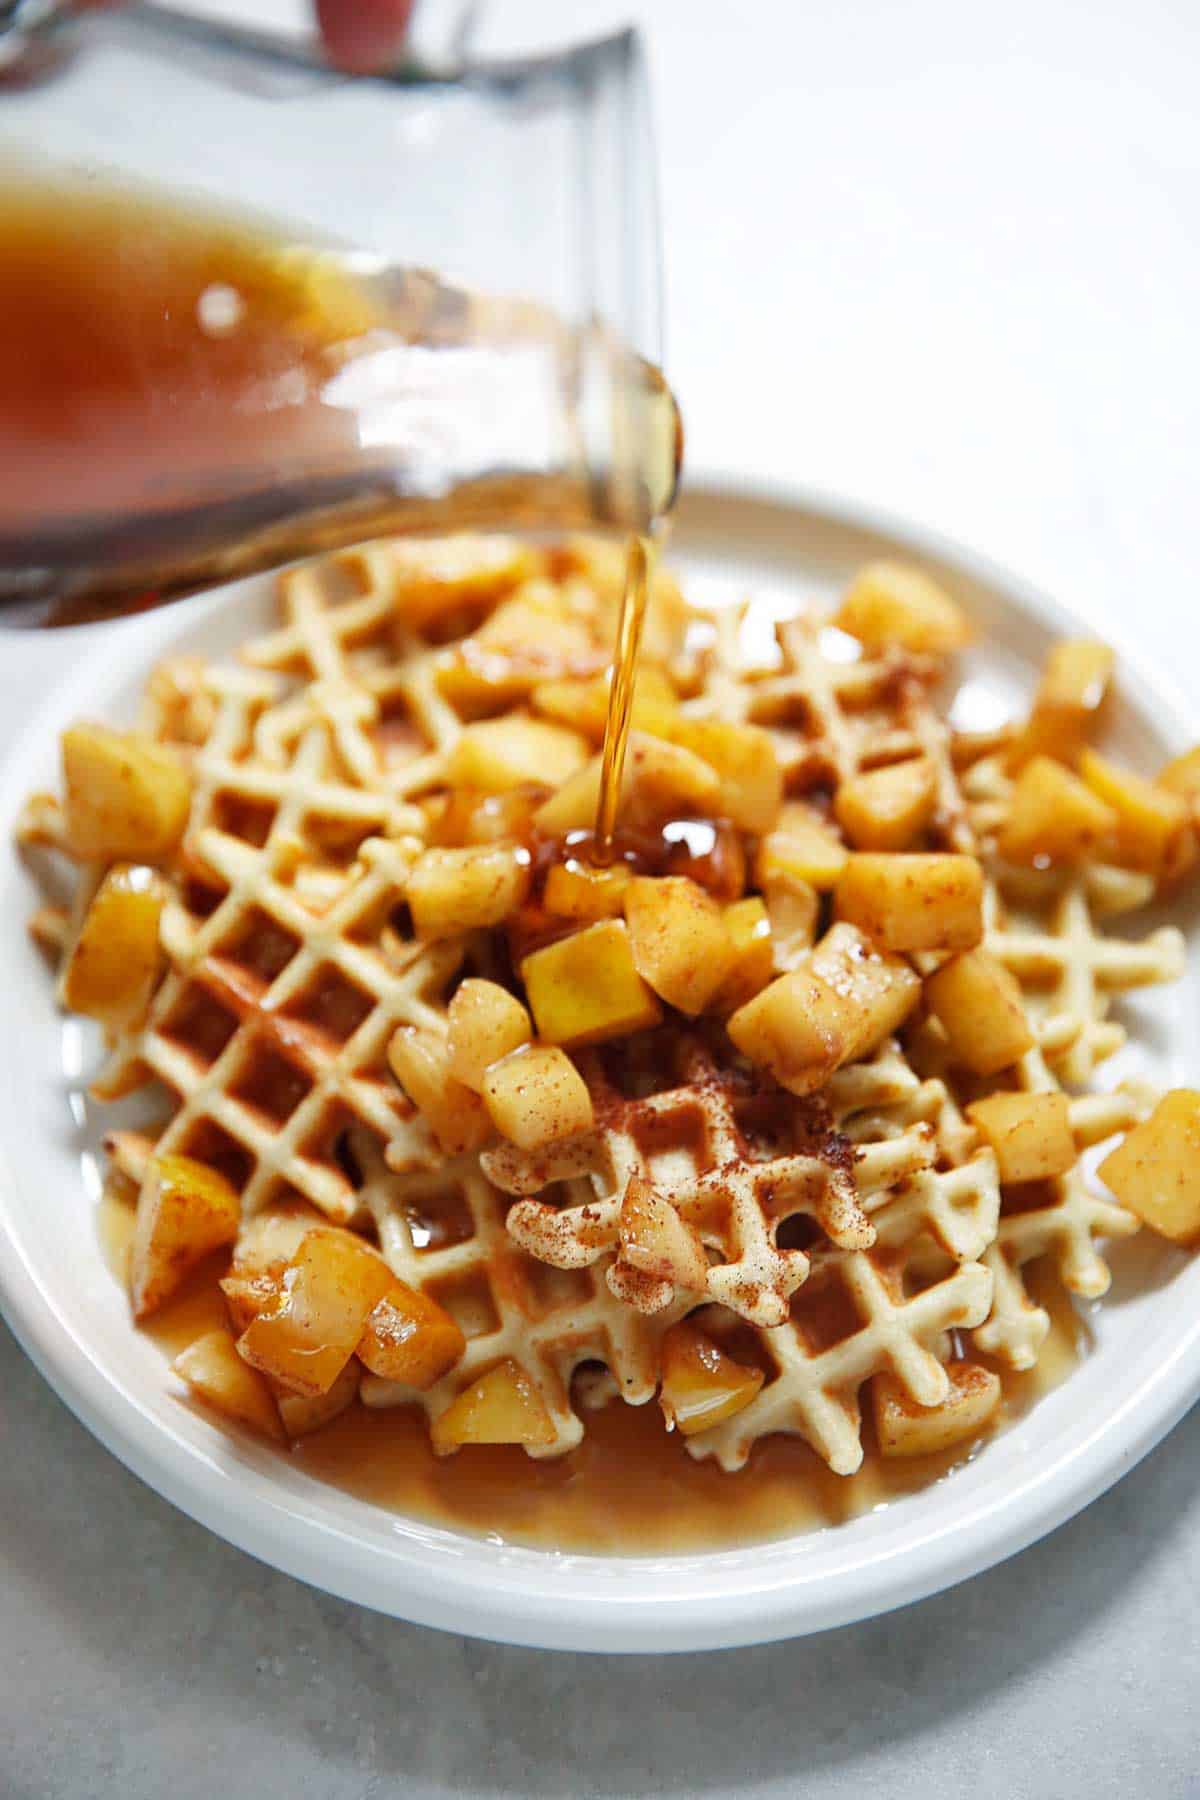 Mini waffles on a plate with apples and maple syrup.